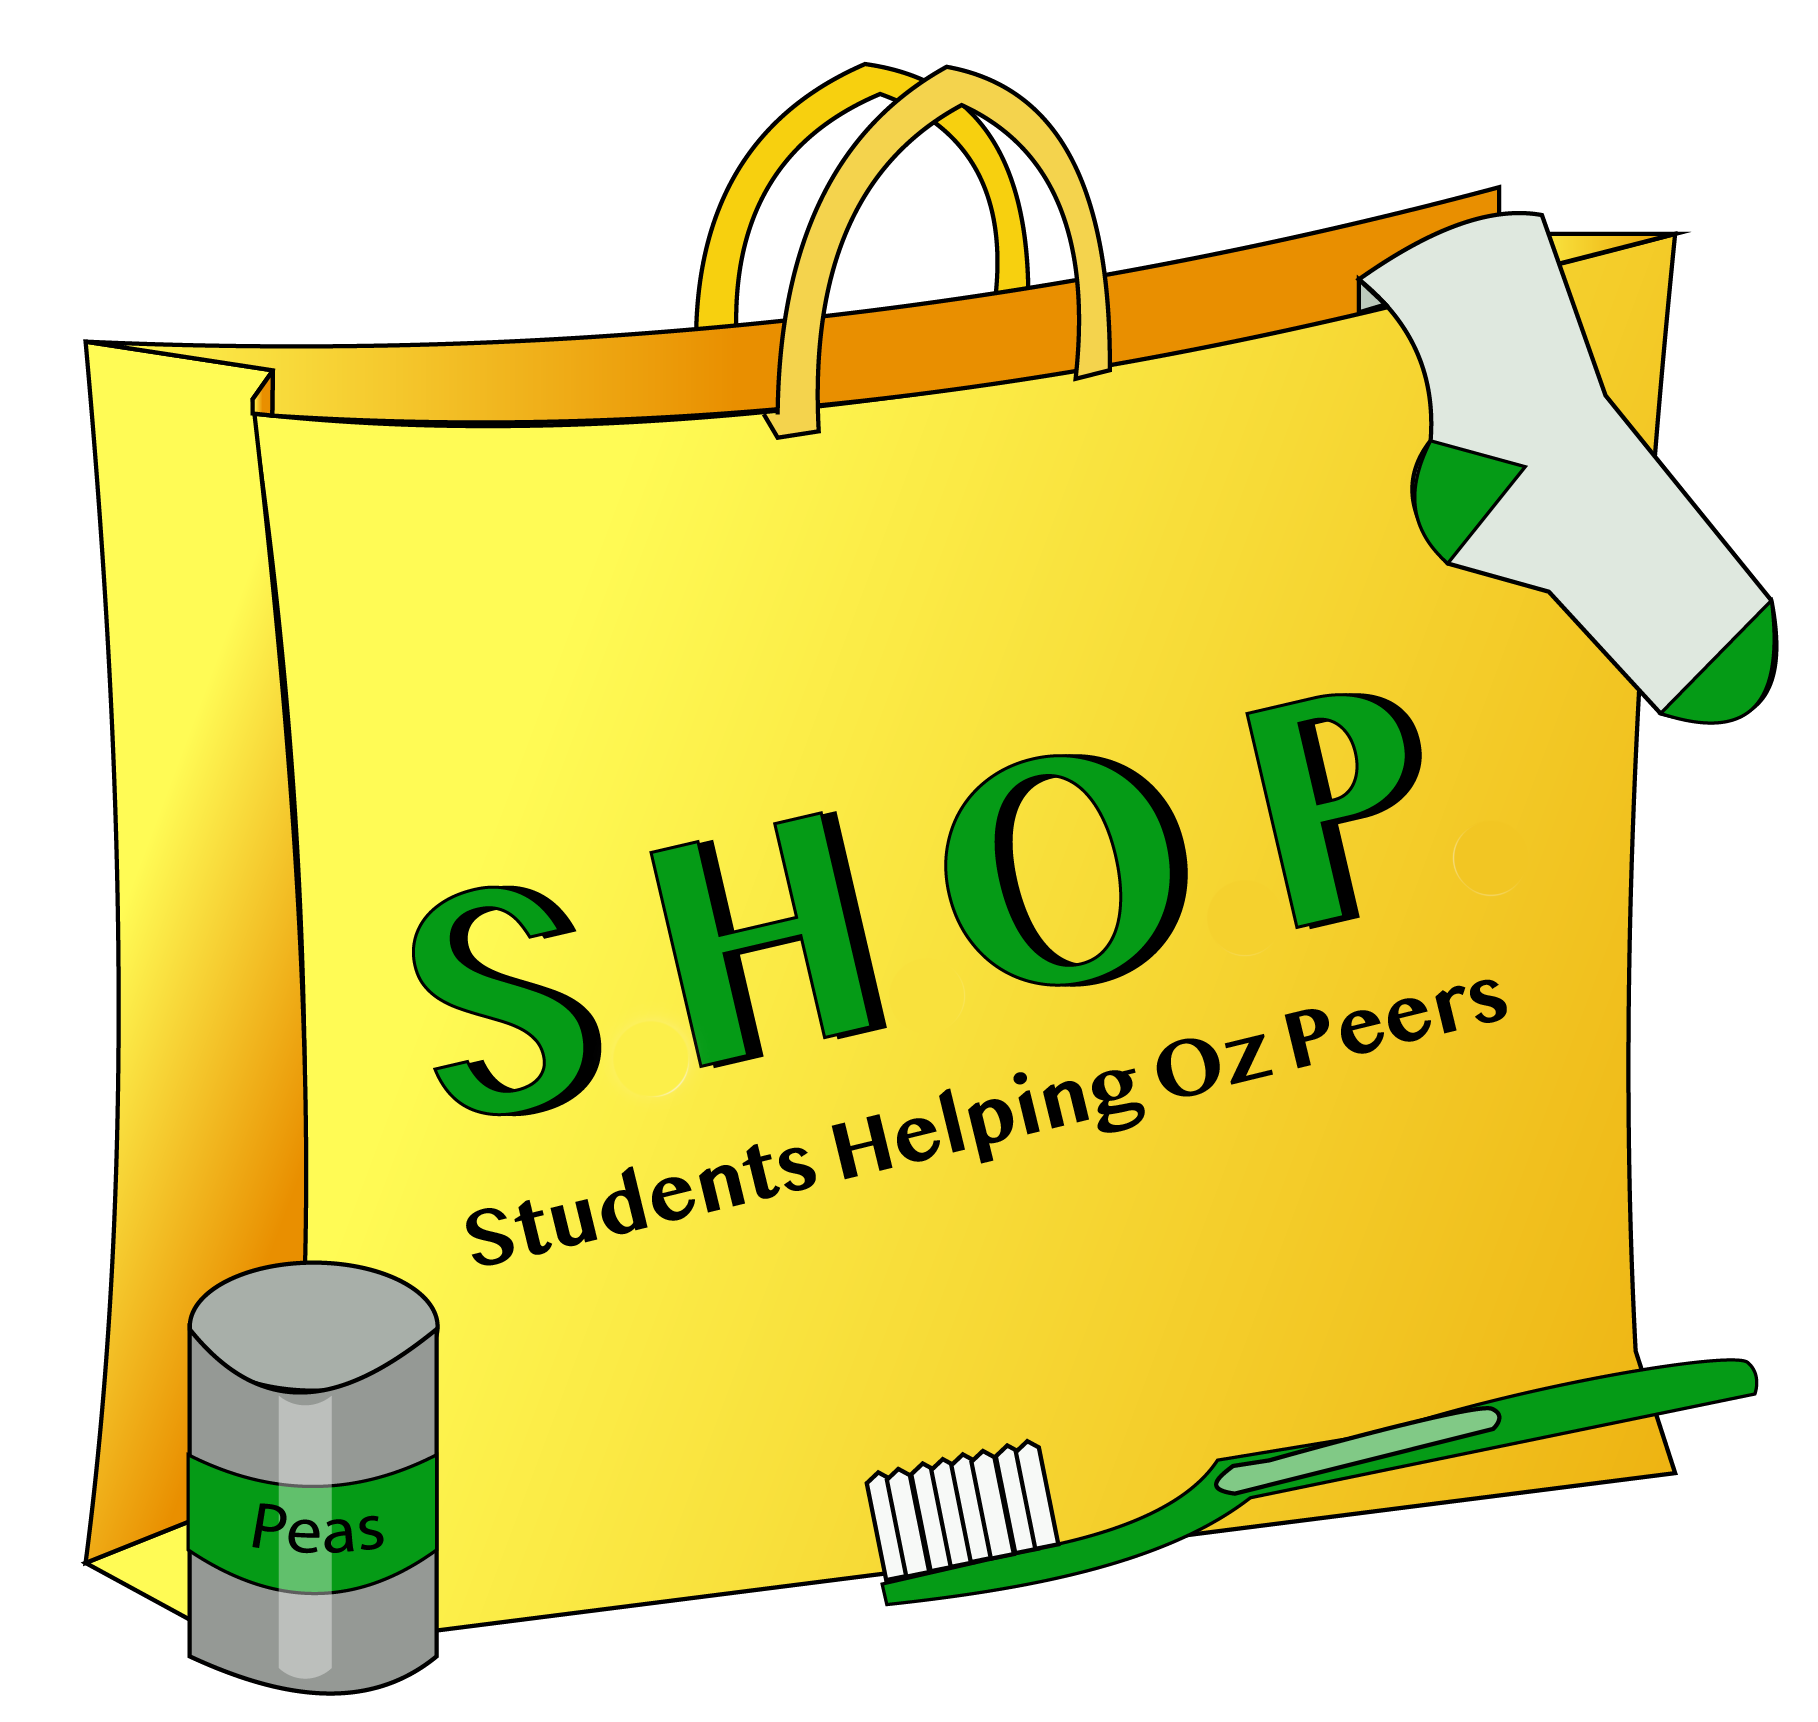 Illustration of a yellow bag with the words "SHOP, Students Helping Oz Peers" on the front. A sock is folded over the top of the bag, and a can of peas and toothbrush are in front of the bag.